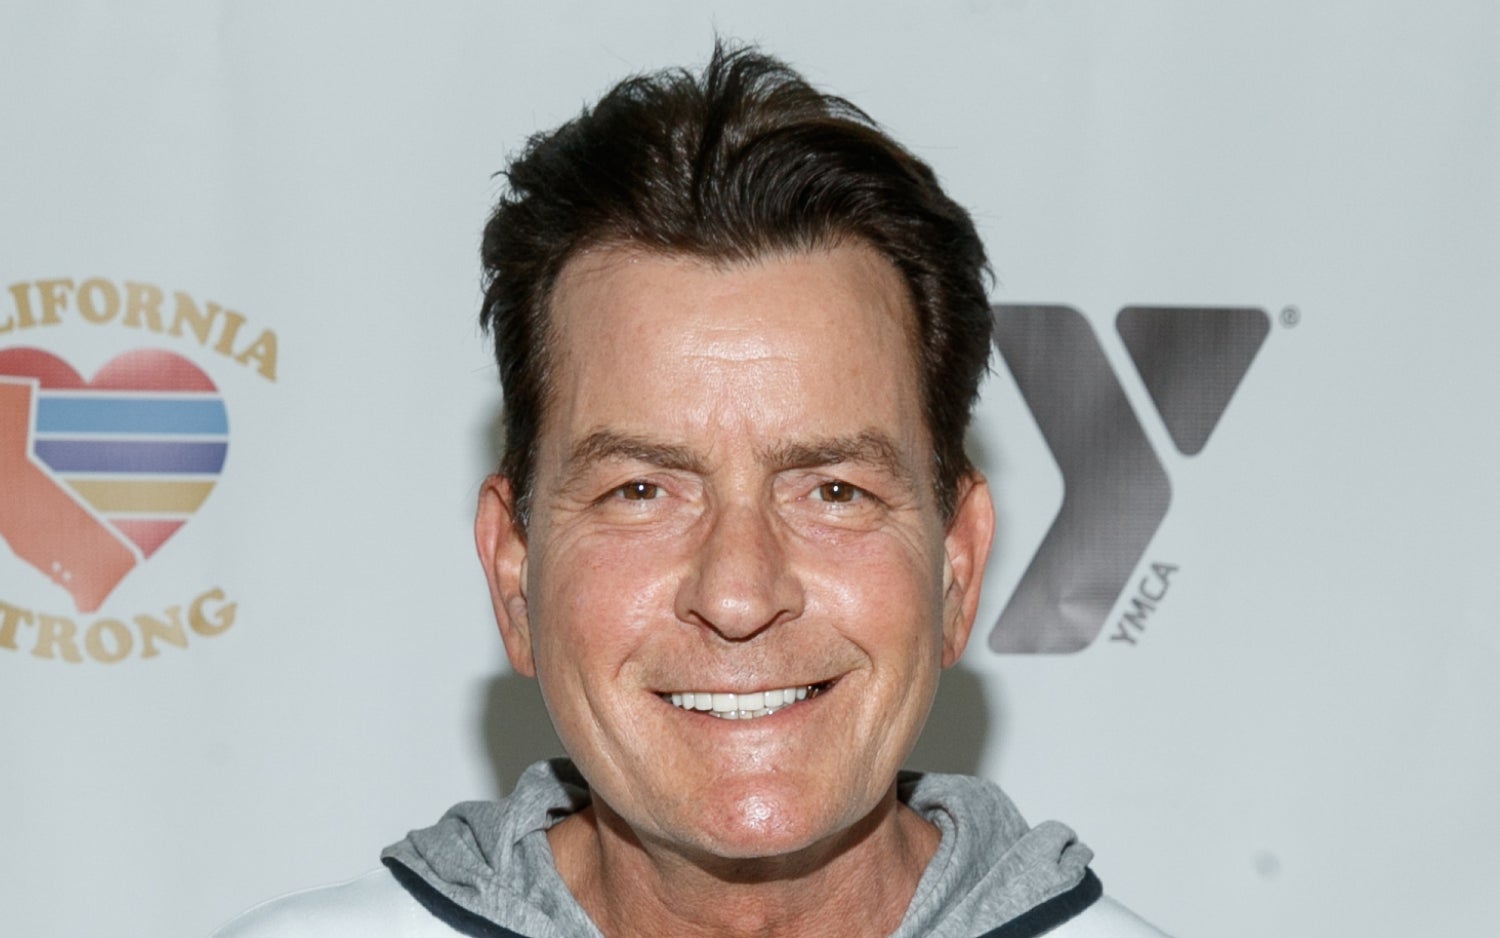 Charlie Sheen's neighbour arrested after she 'tried to choke' actor in his home